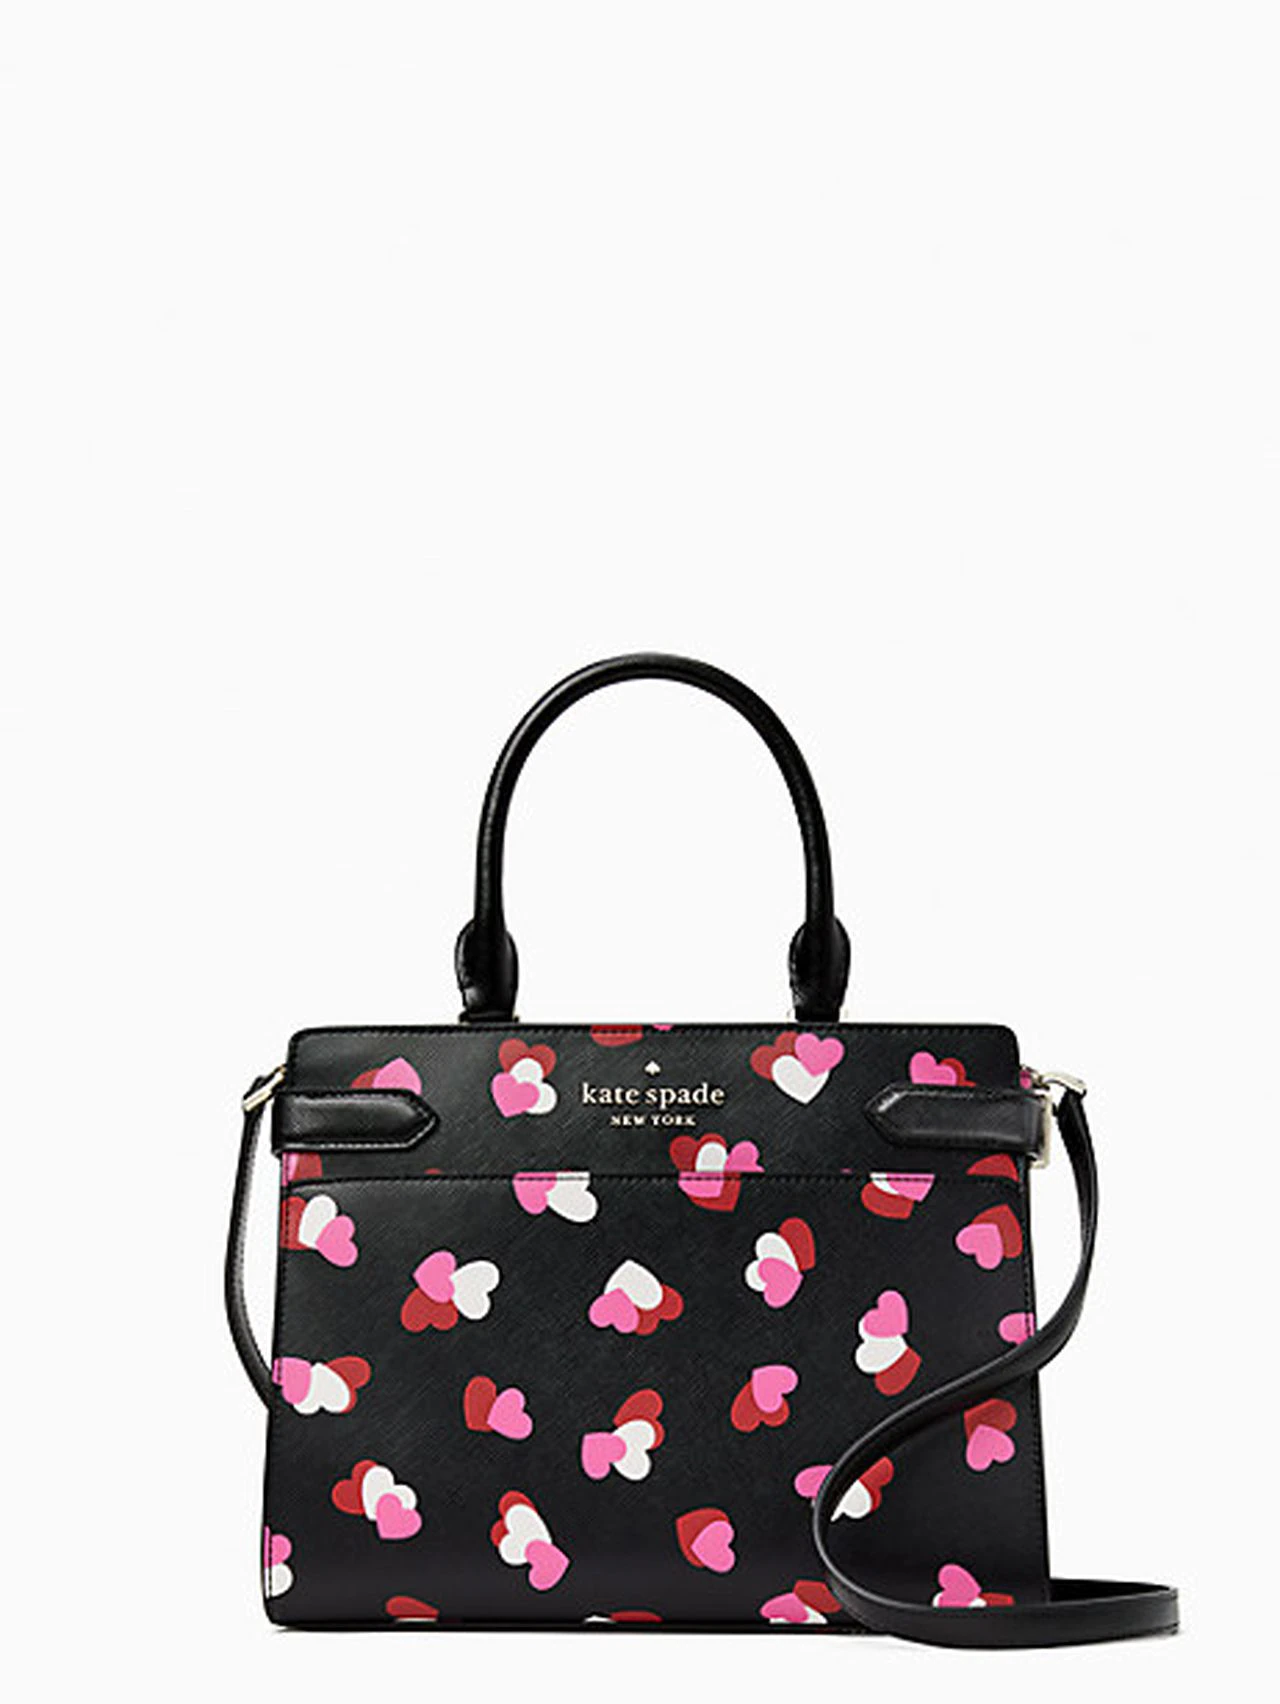 Update your closet: Kate Spade is having a surprise 75% off sale on 